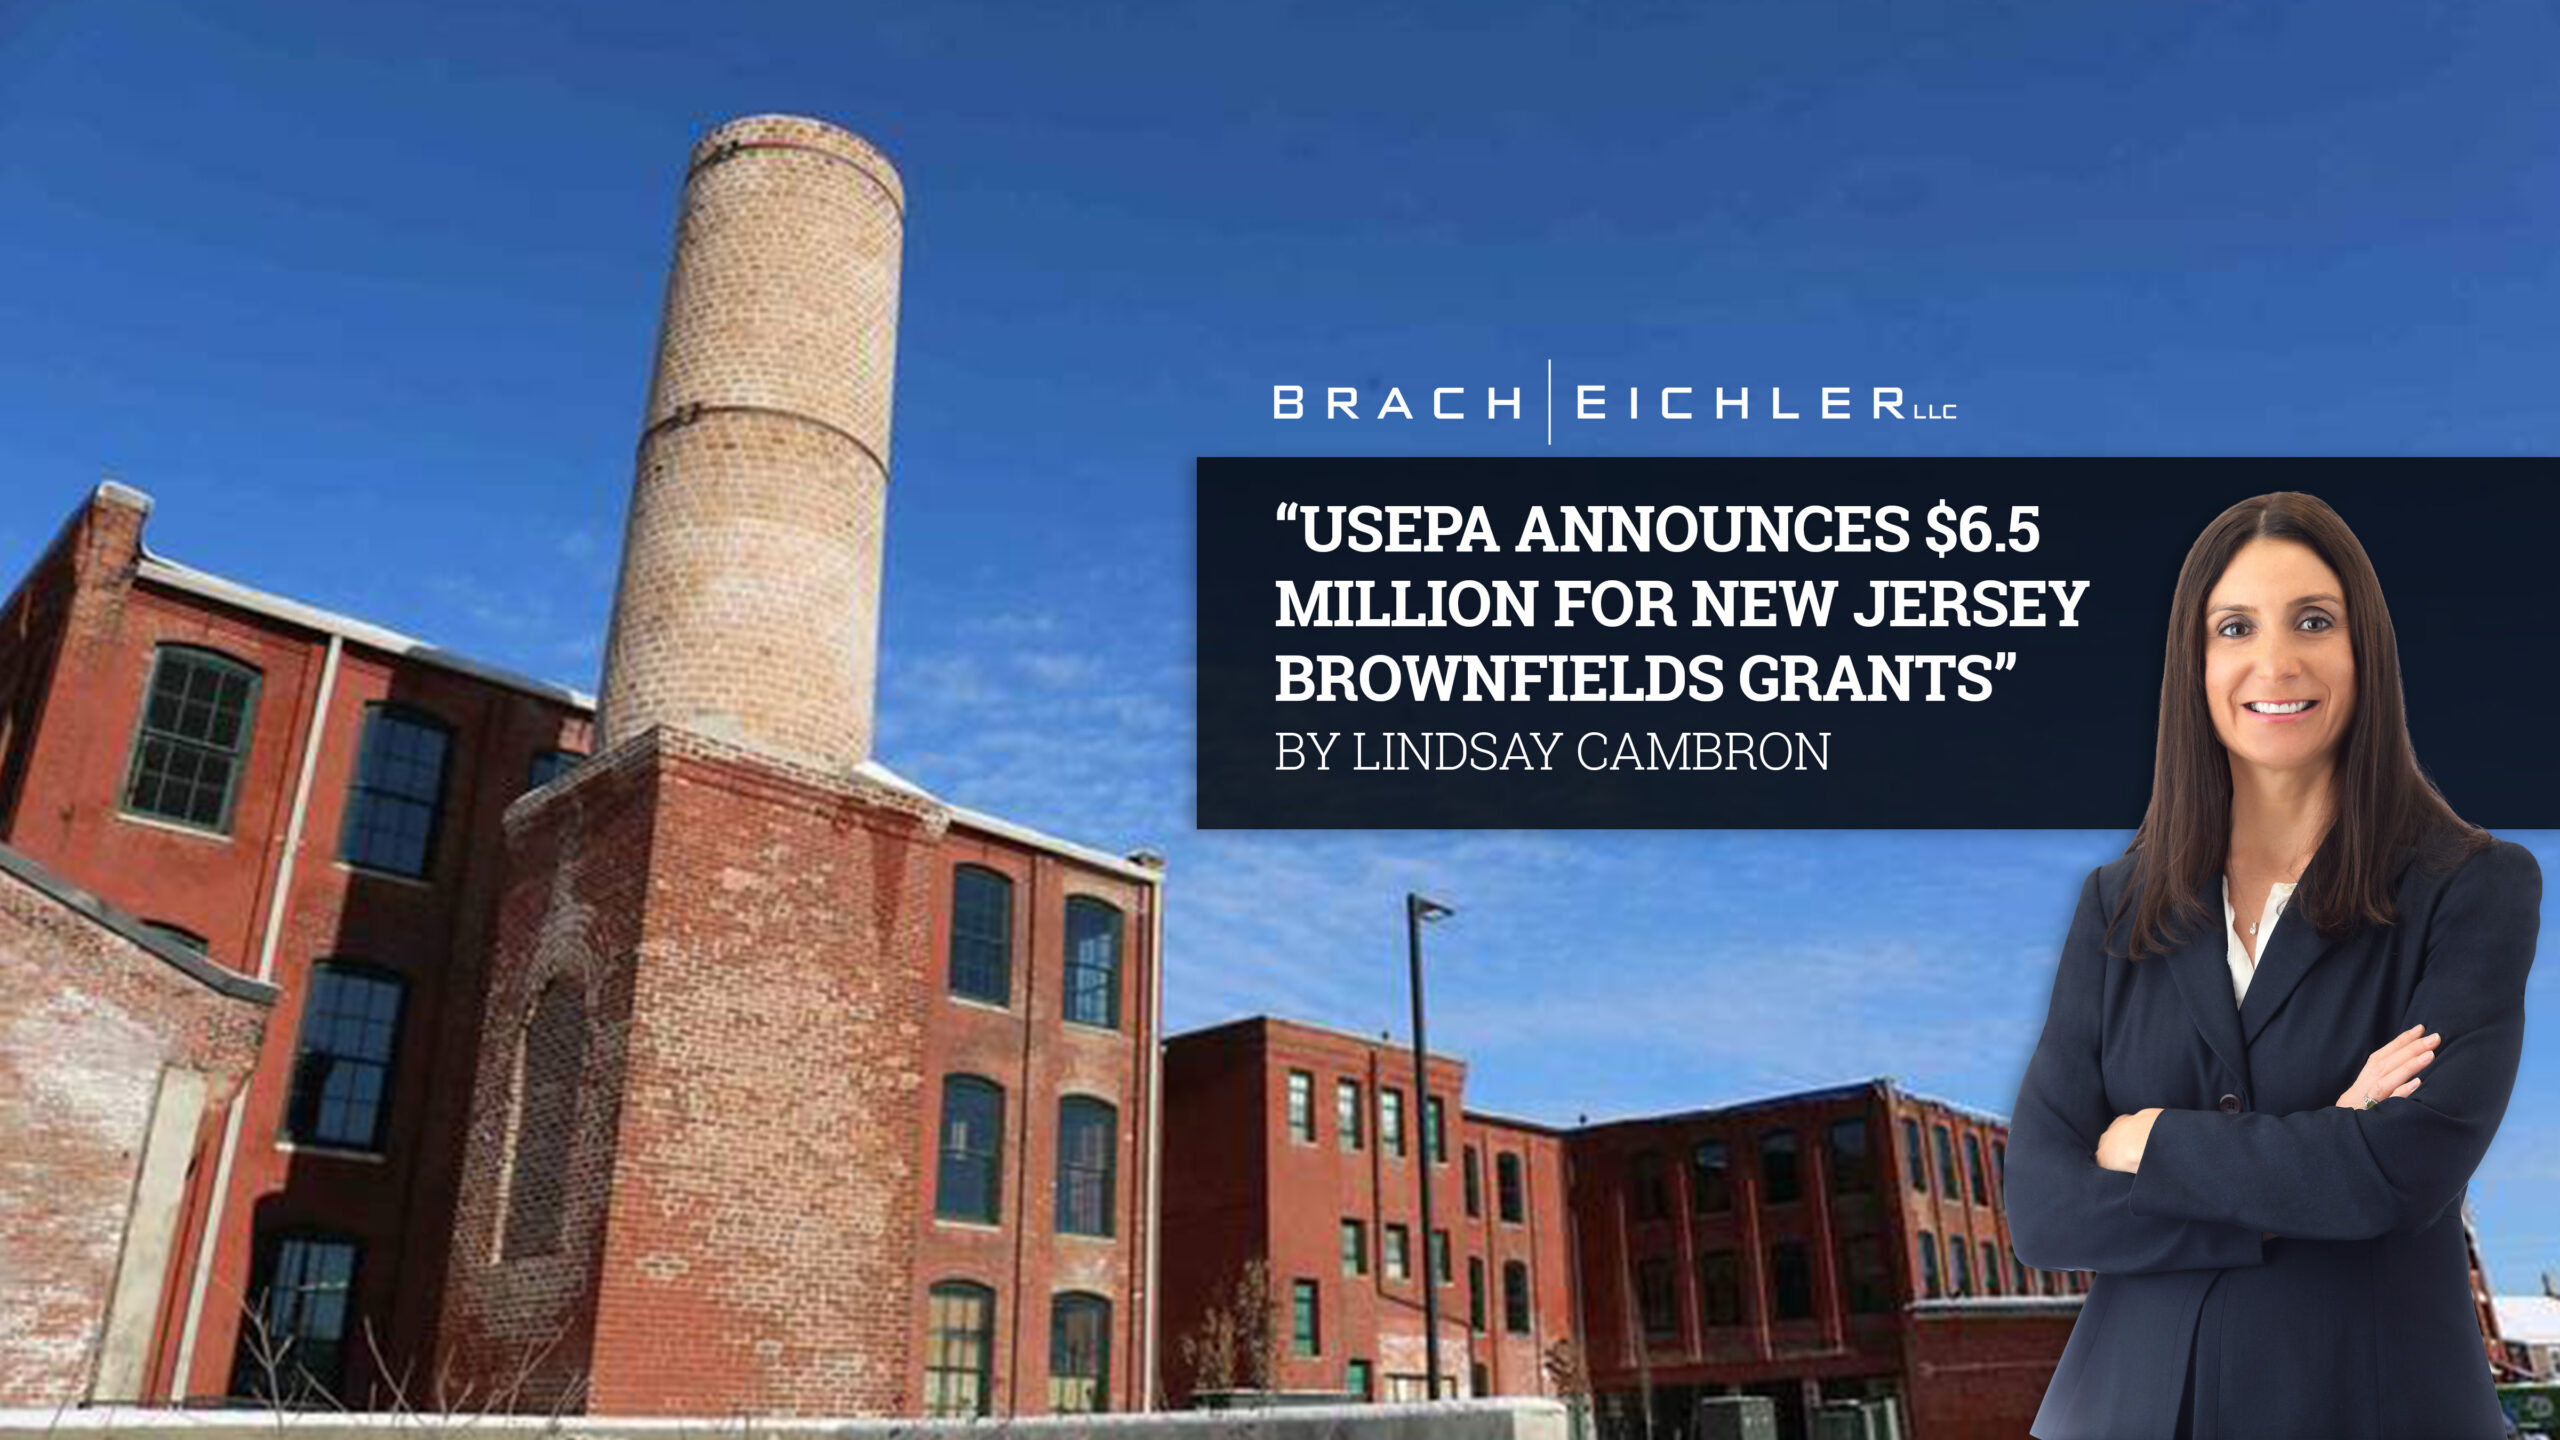 USEPA Announces $6.5 Million for New Jersey Brownfields Grants - Lindsay Cambron - Brach Eichler